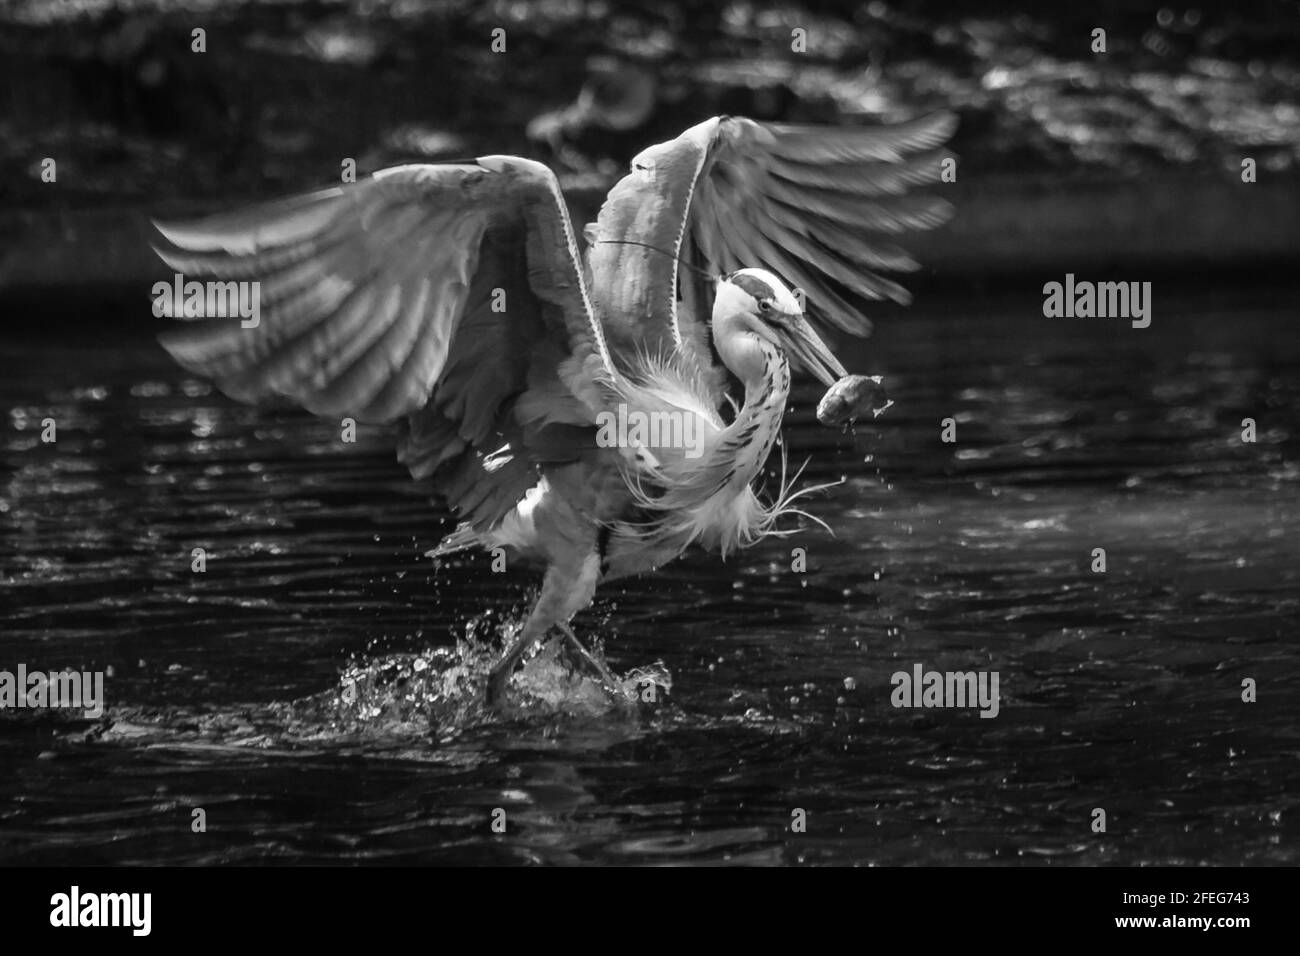 A black and white image of a heron making off with a fish in it's beak. Stock Photo